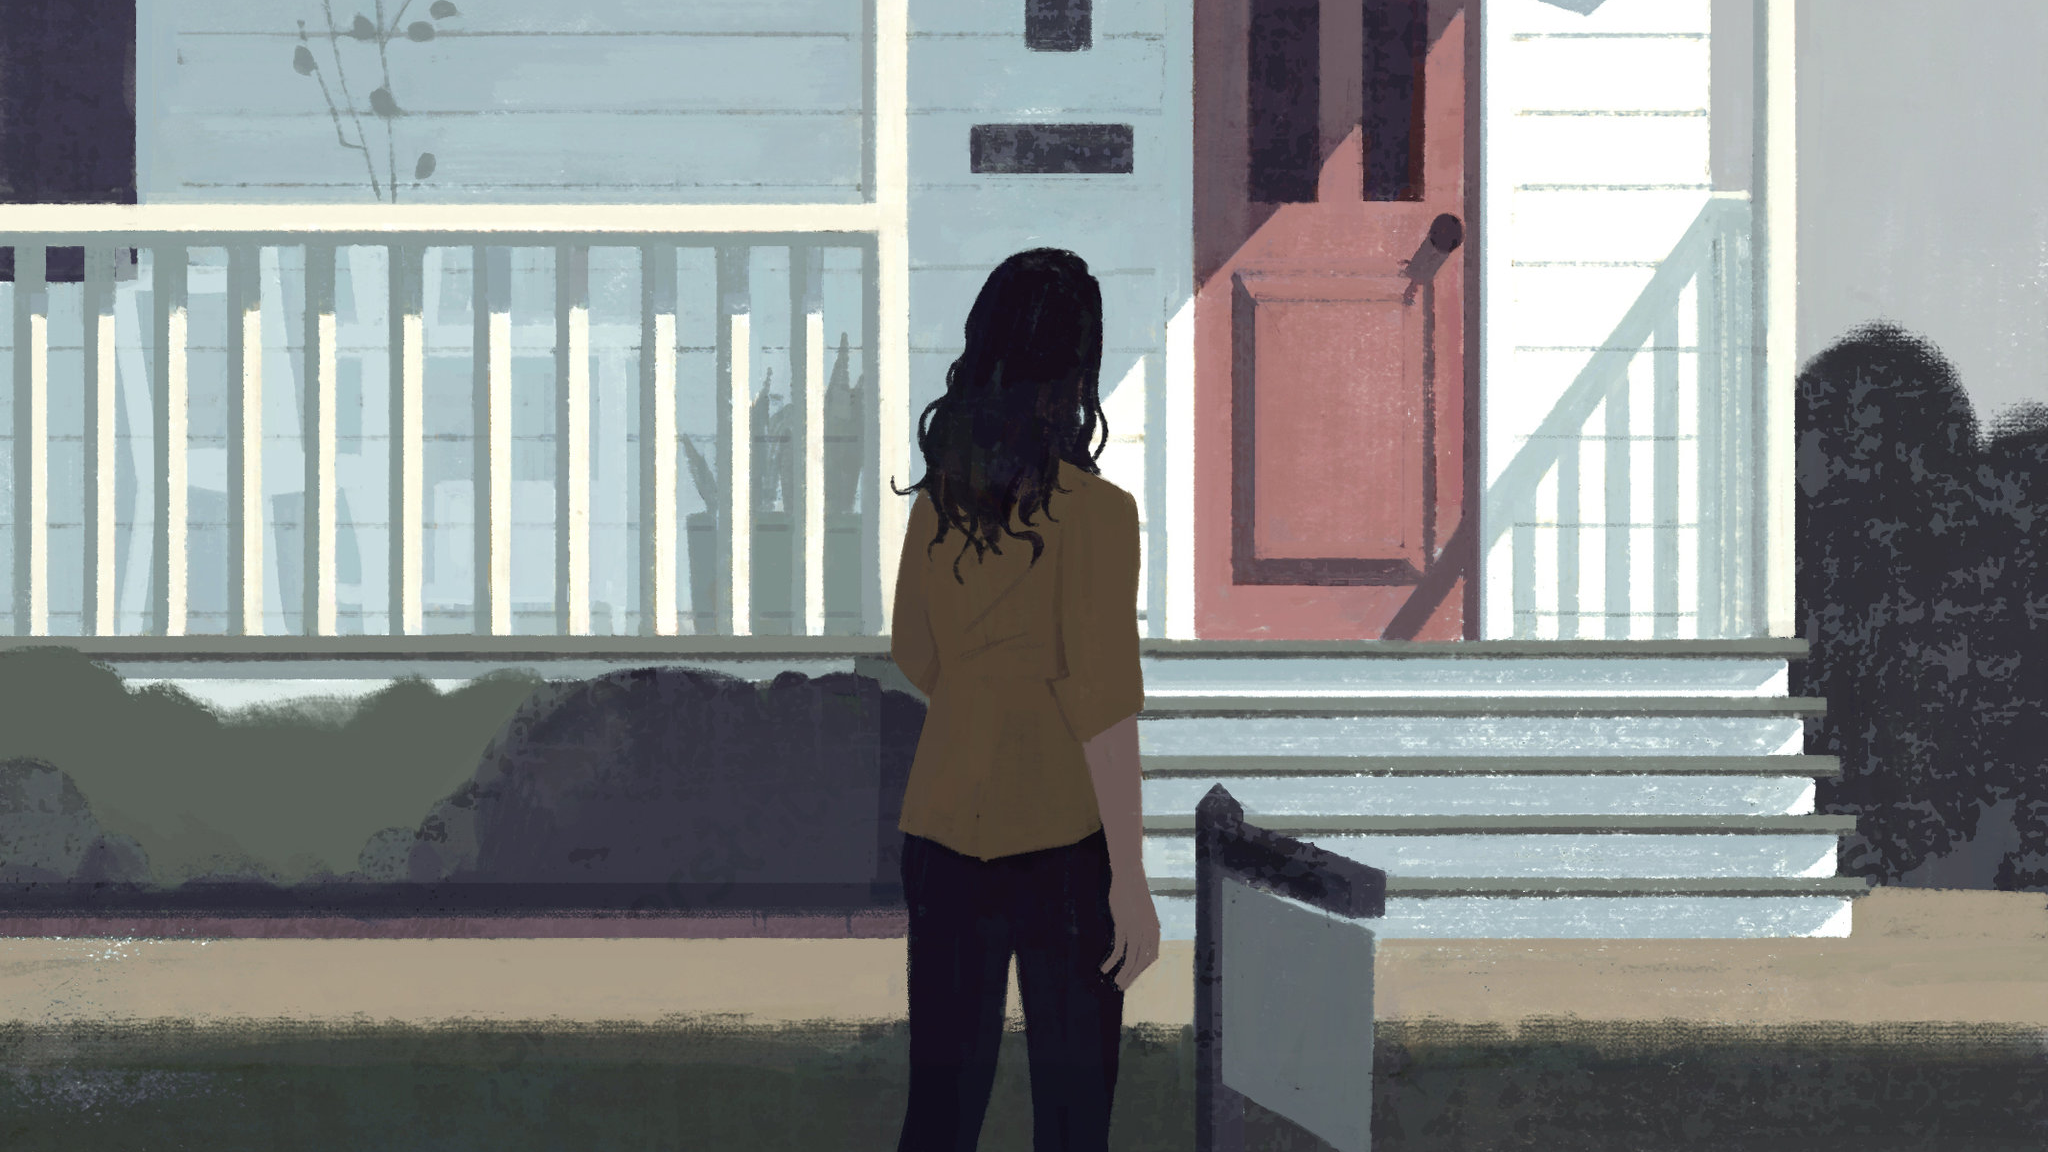 Illustration by Katherine Lam of a woman approaching a house; links to news story